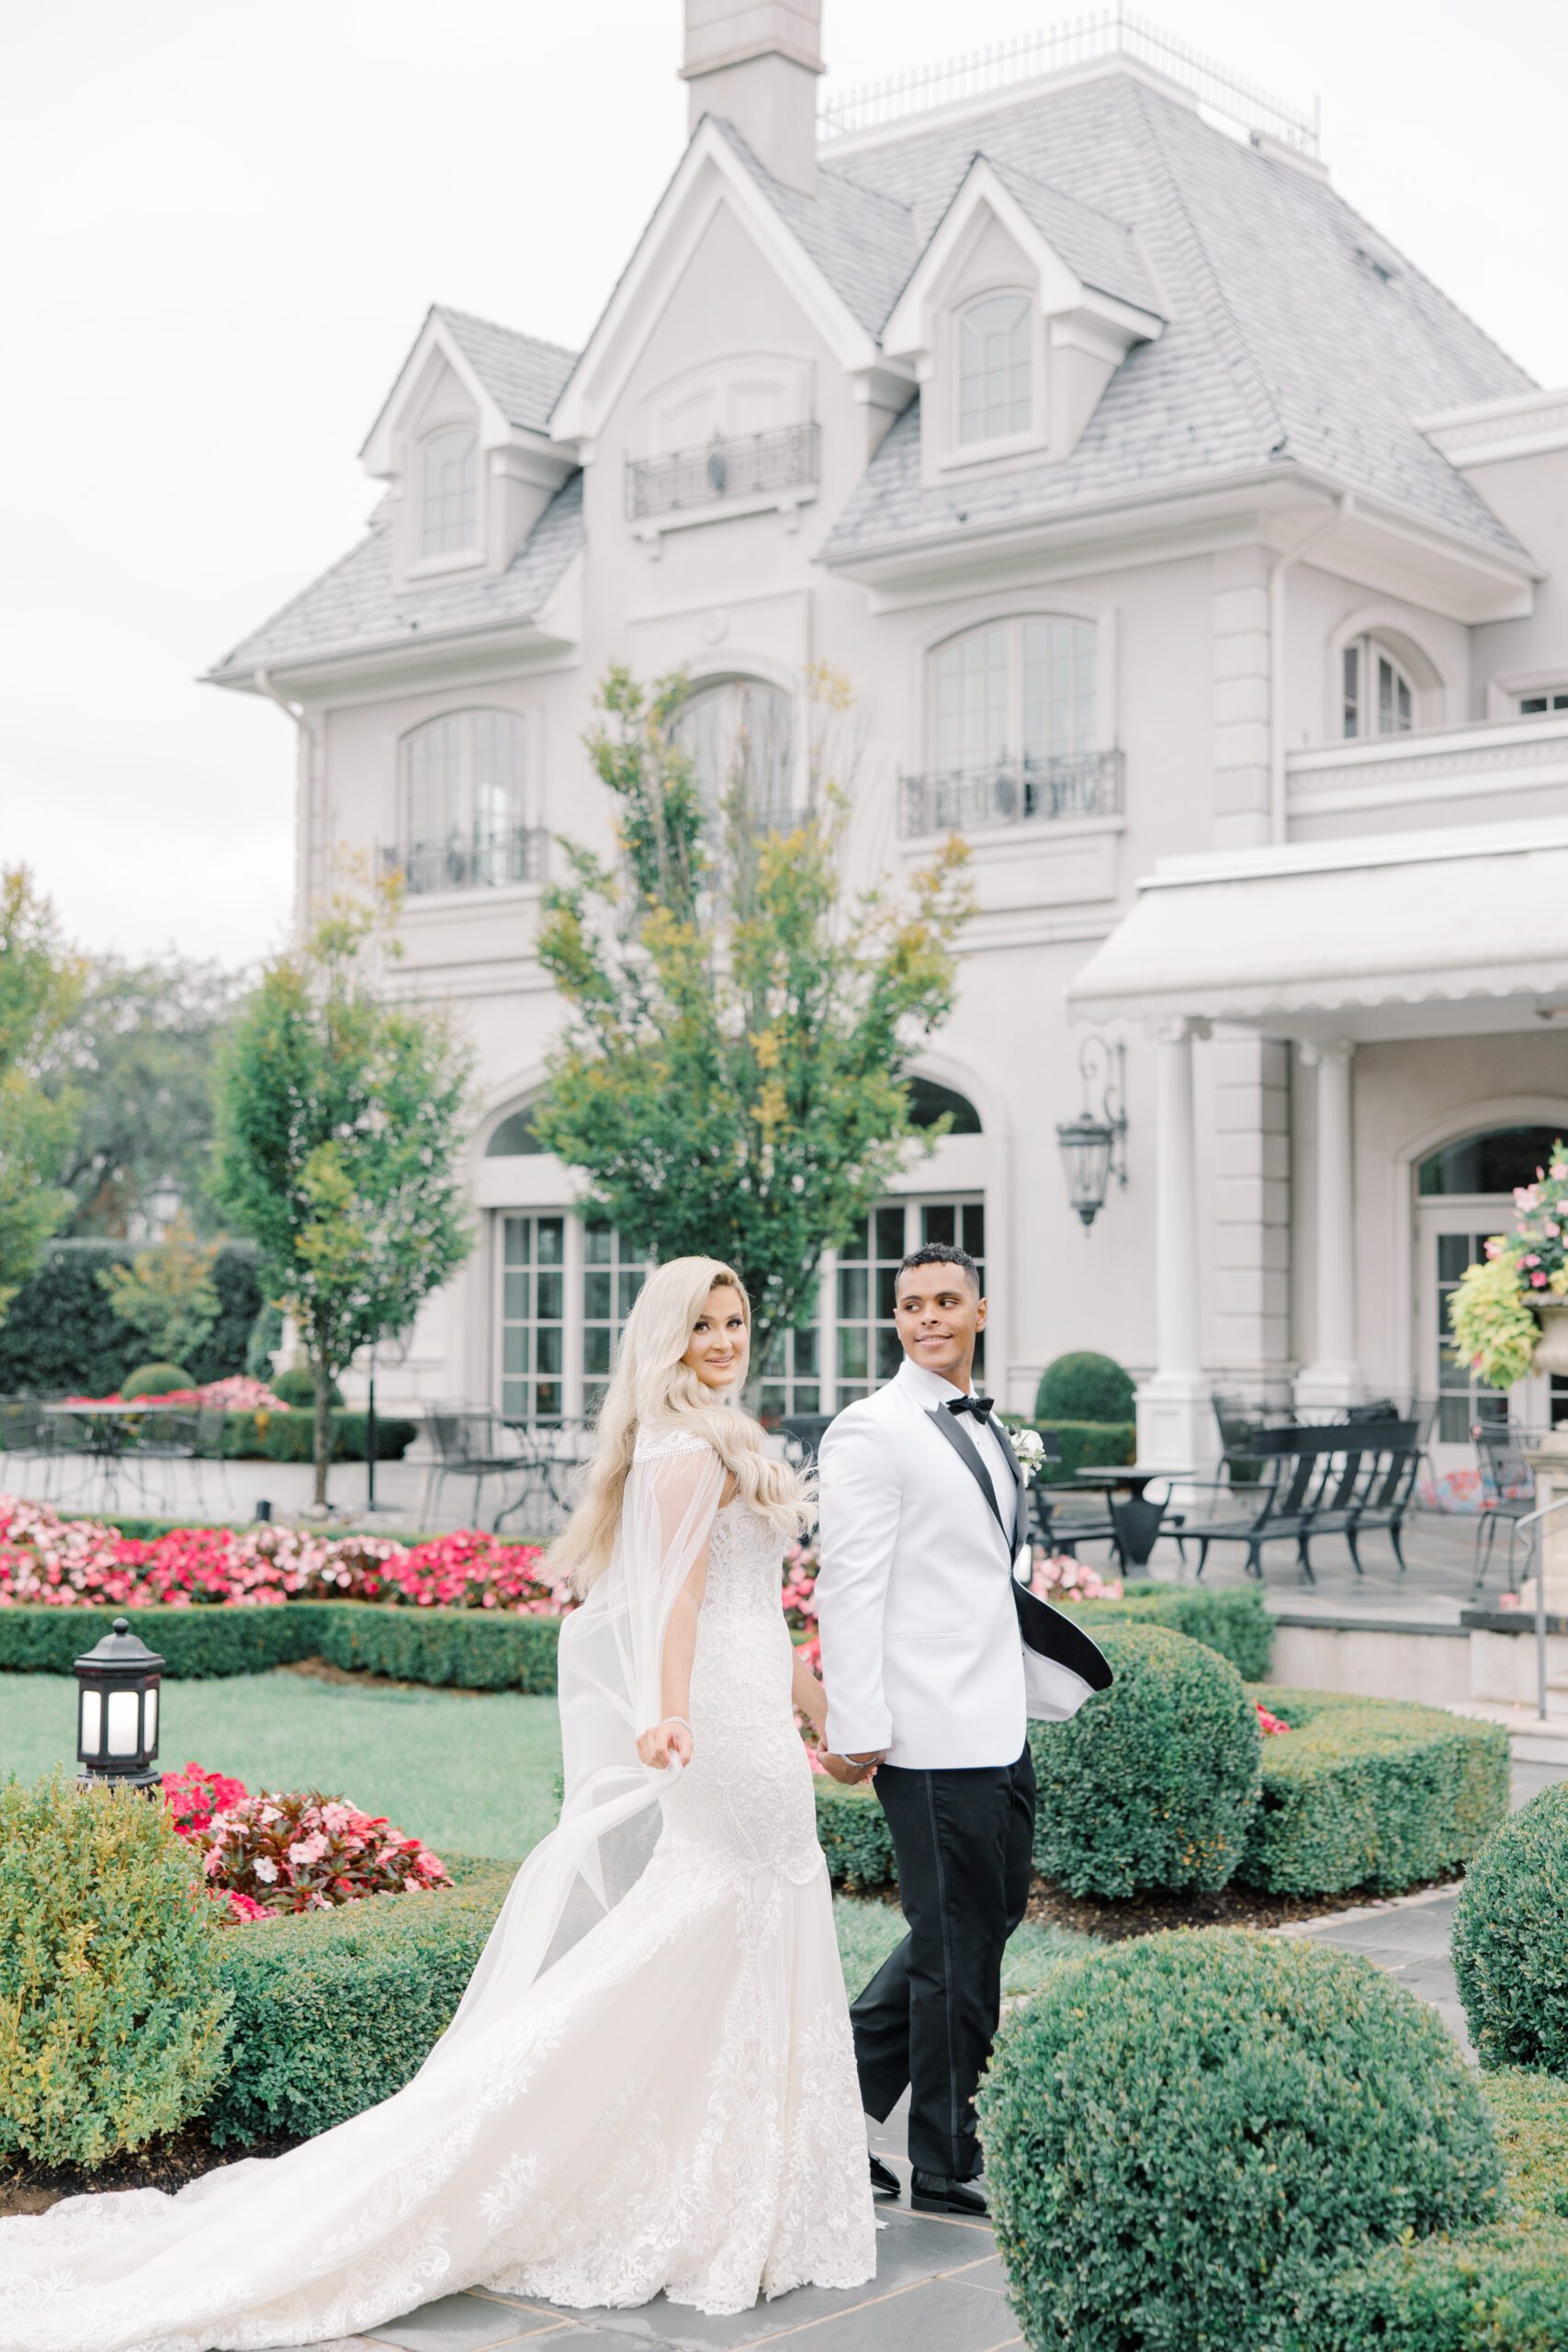 Bride and groom walking in garden at Park Chateau in East Brunswick, NJ.